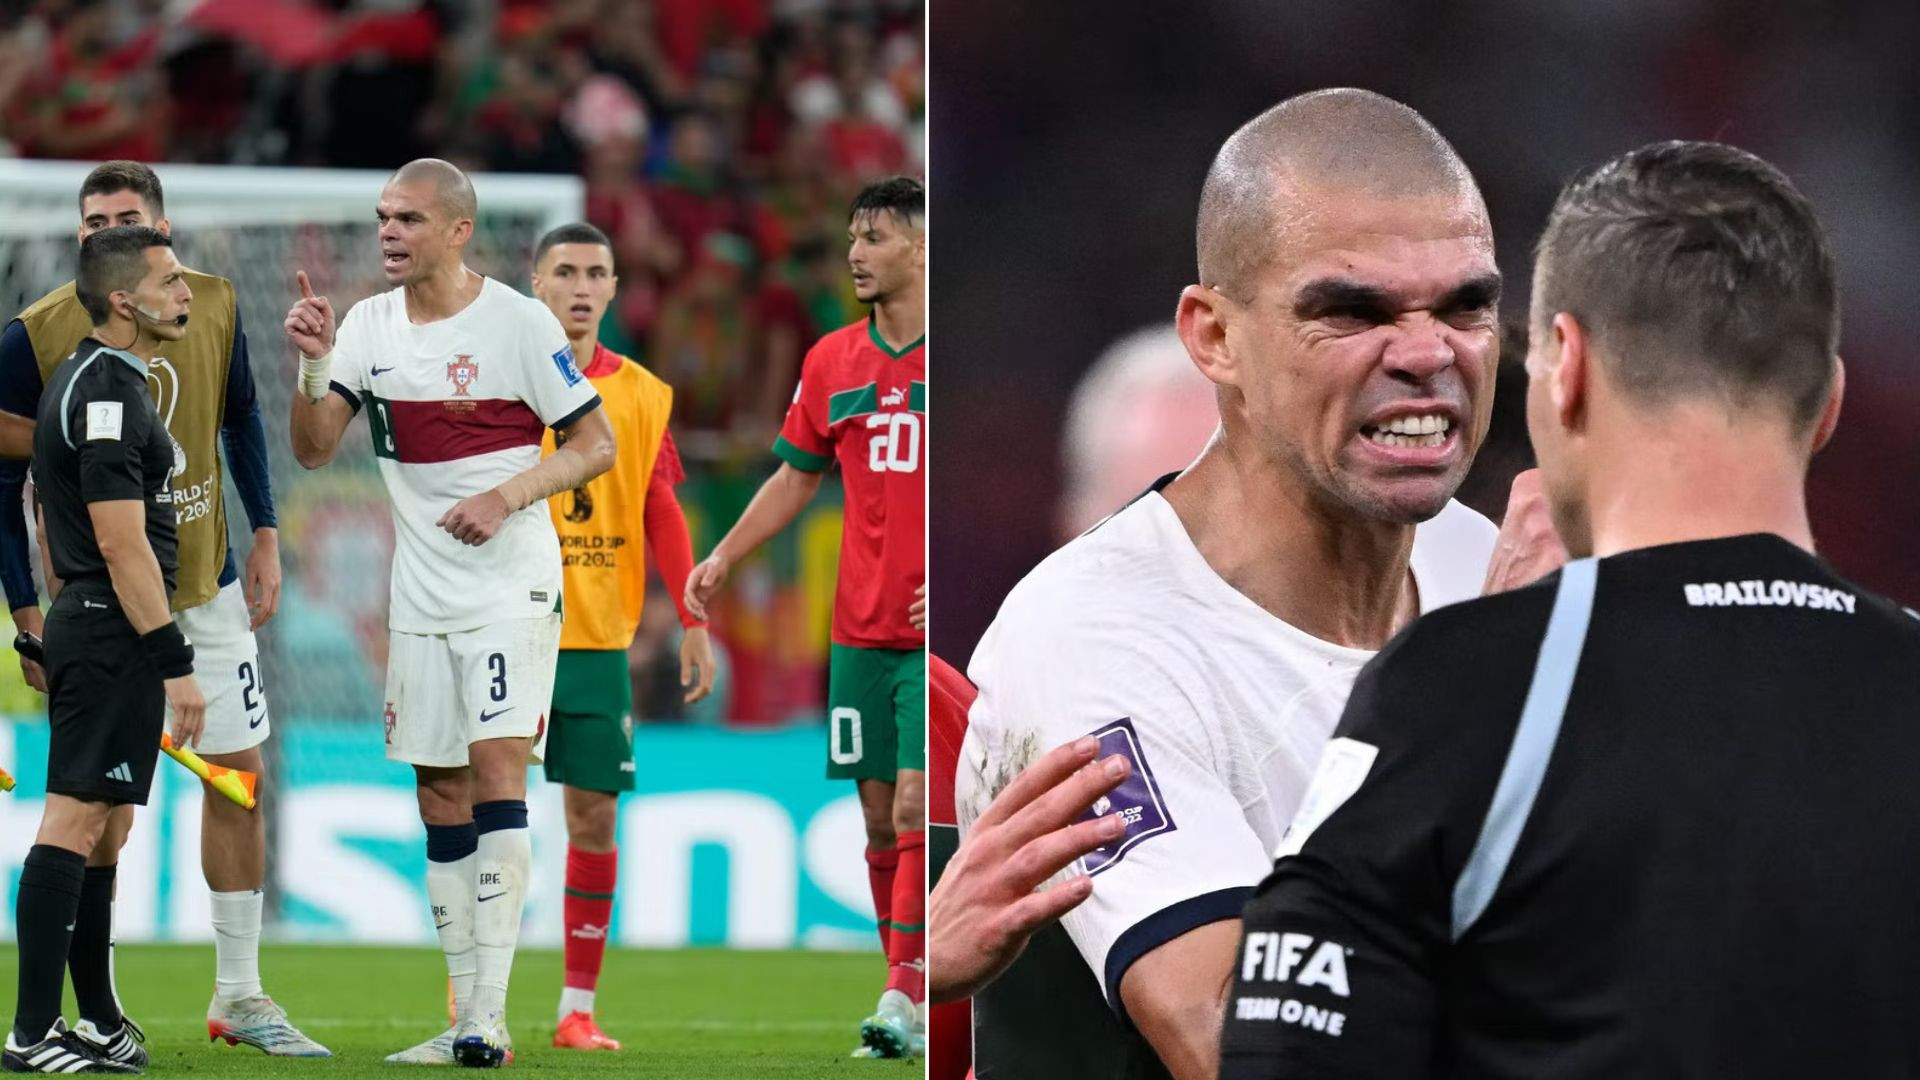 Portugal slam Argentine referee after World Cup exit